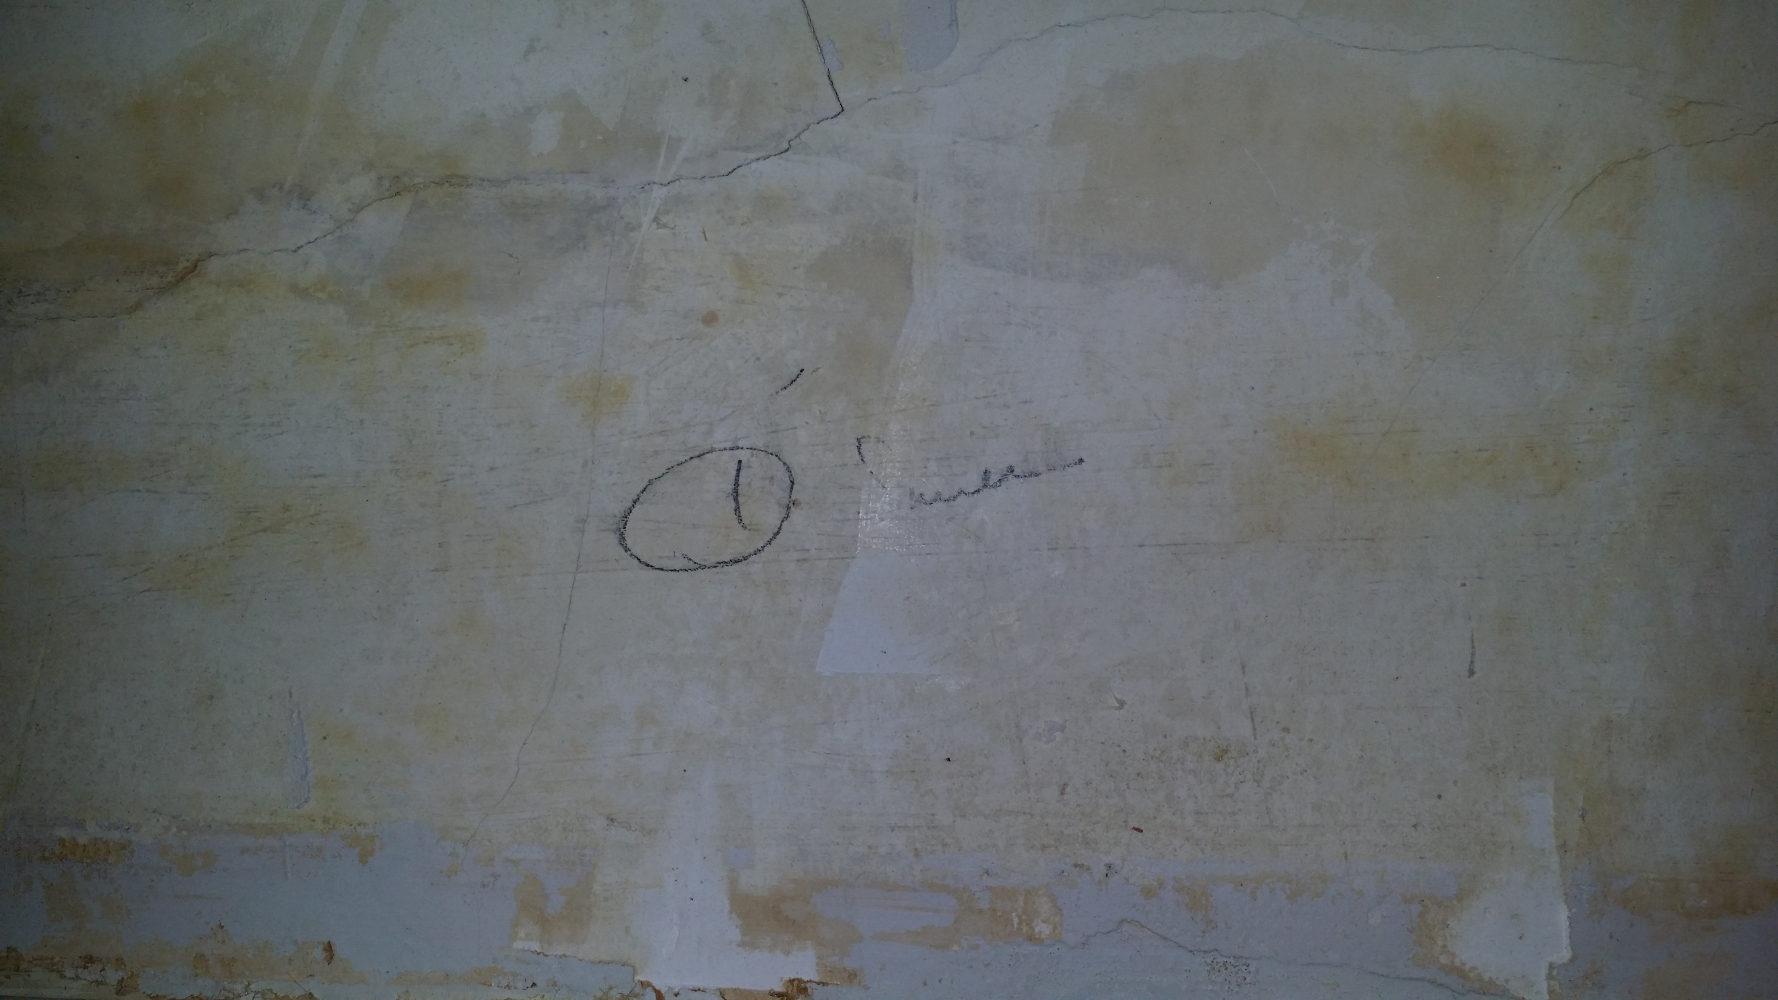 Some cool contractor scribblings from back in the day.  They do match the notes on the original blueprints.